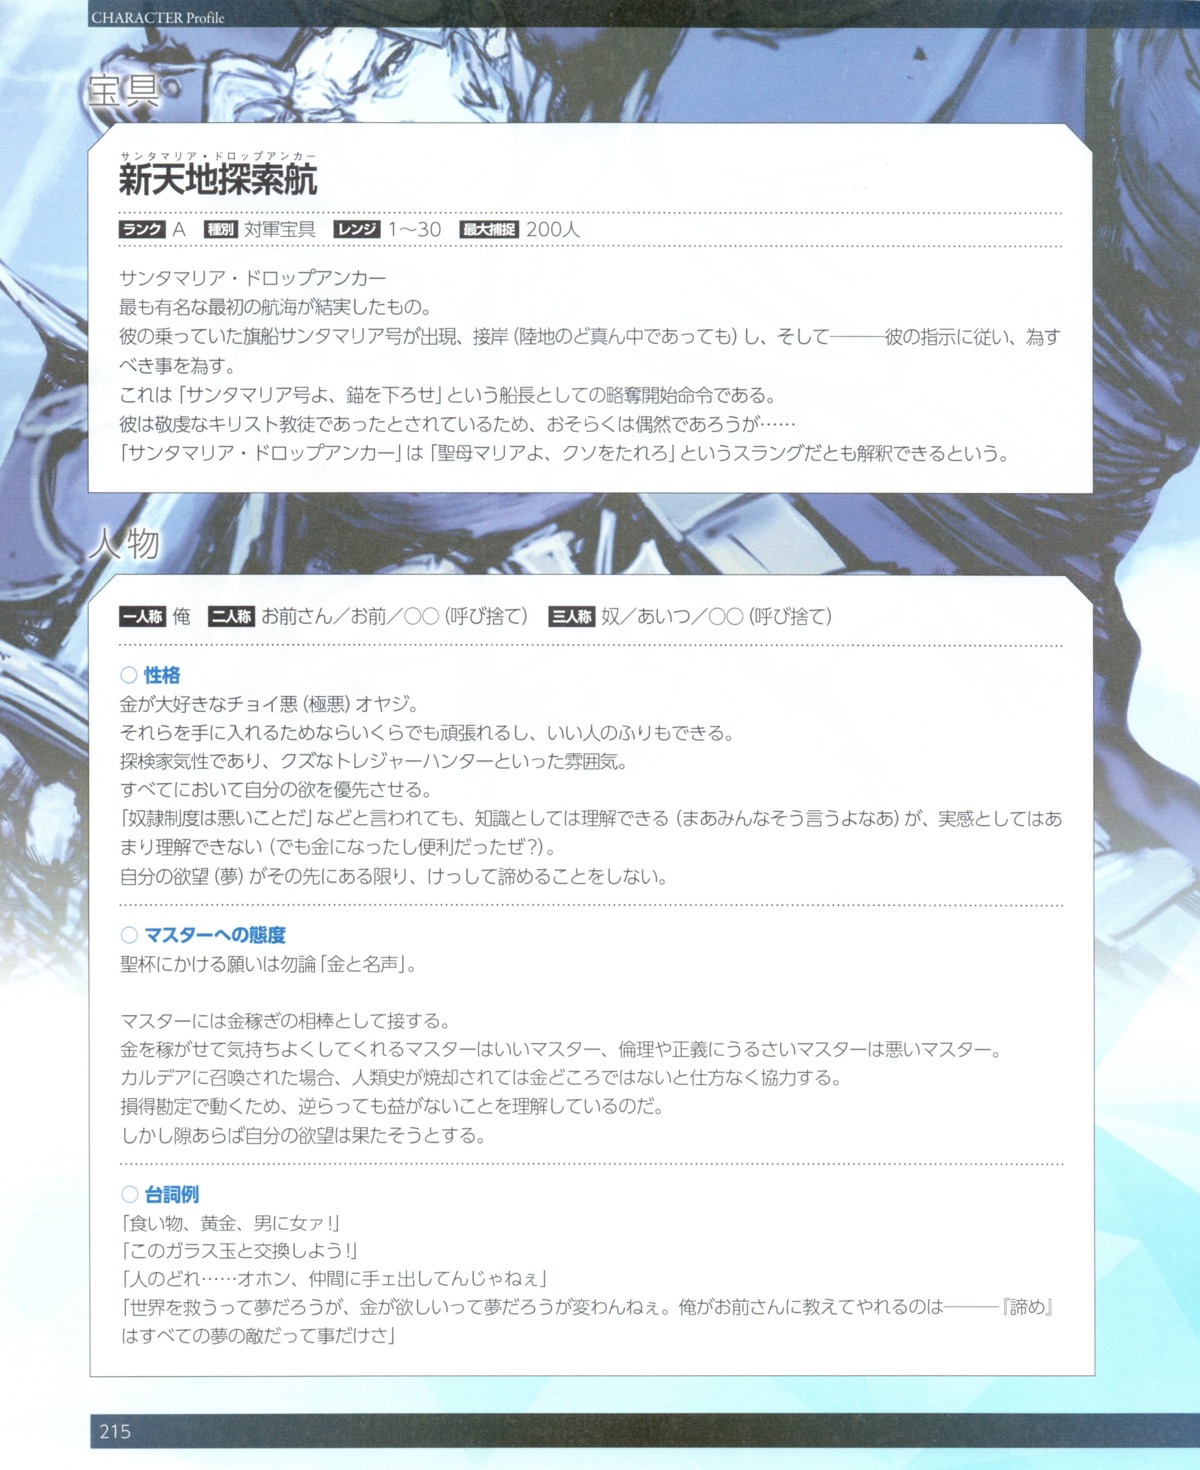 possible_duplicate text type-moon